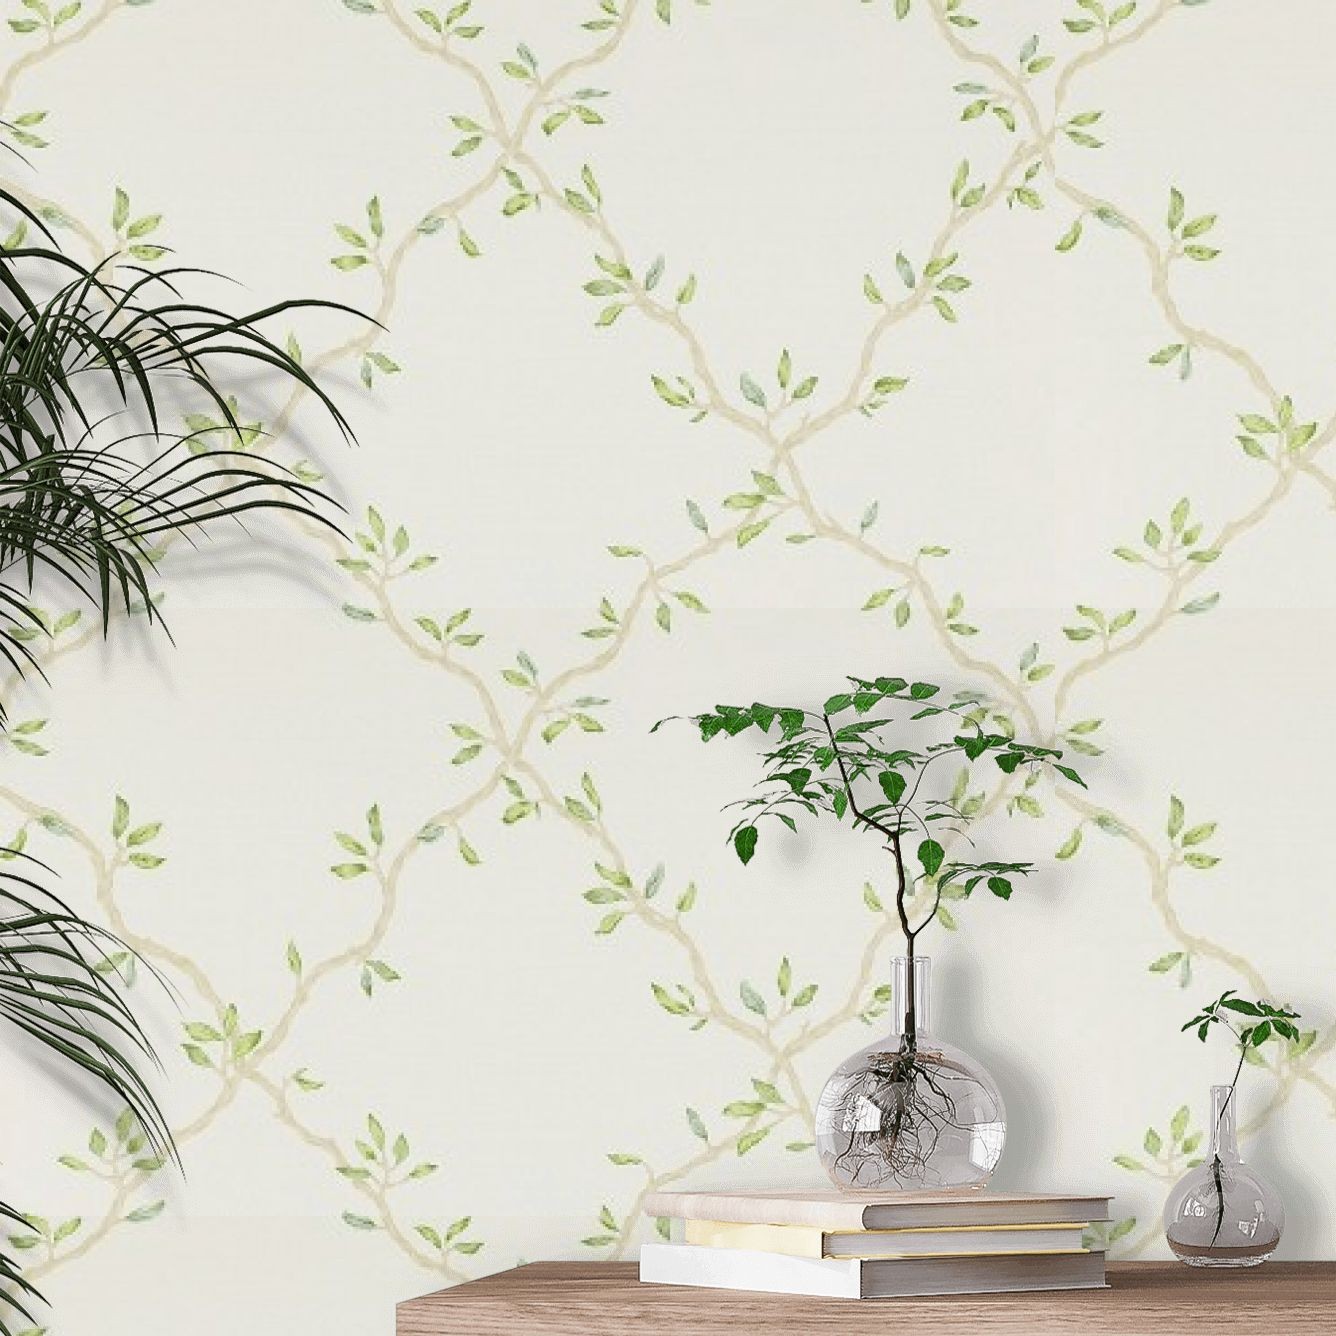 Leaf Trellis Wallpaper - Pale Green - By Colefax and Fowler - 07706/02